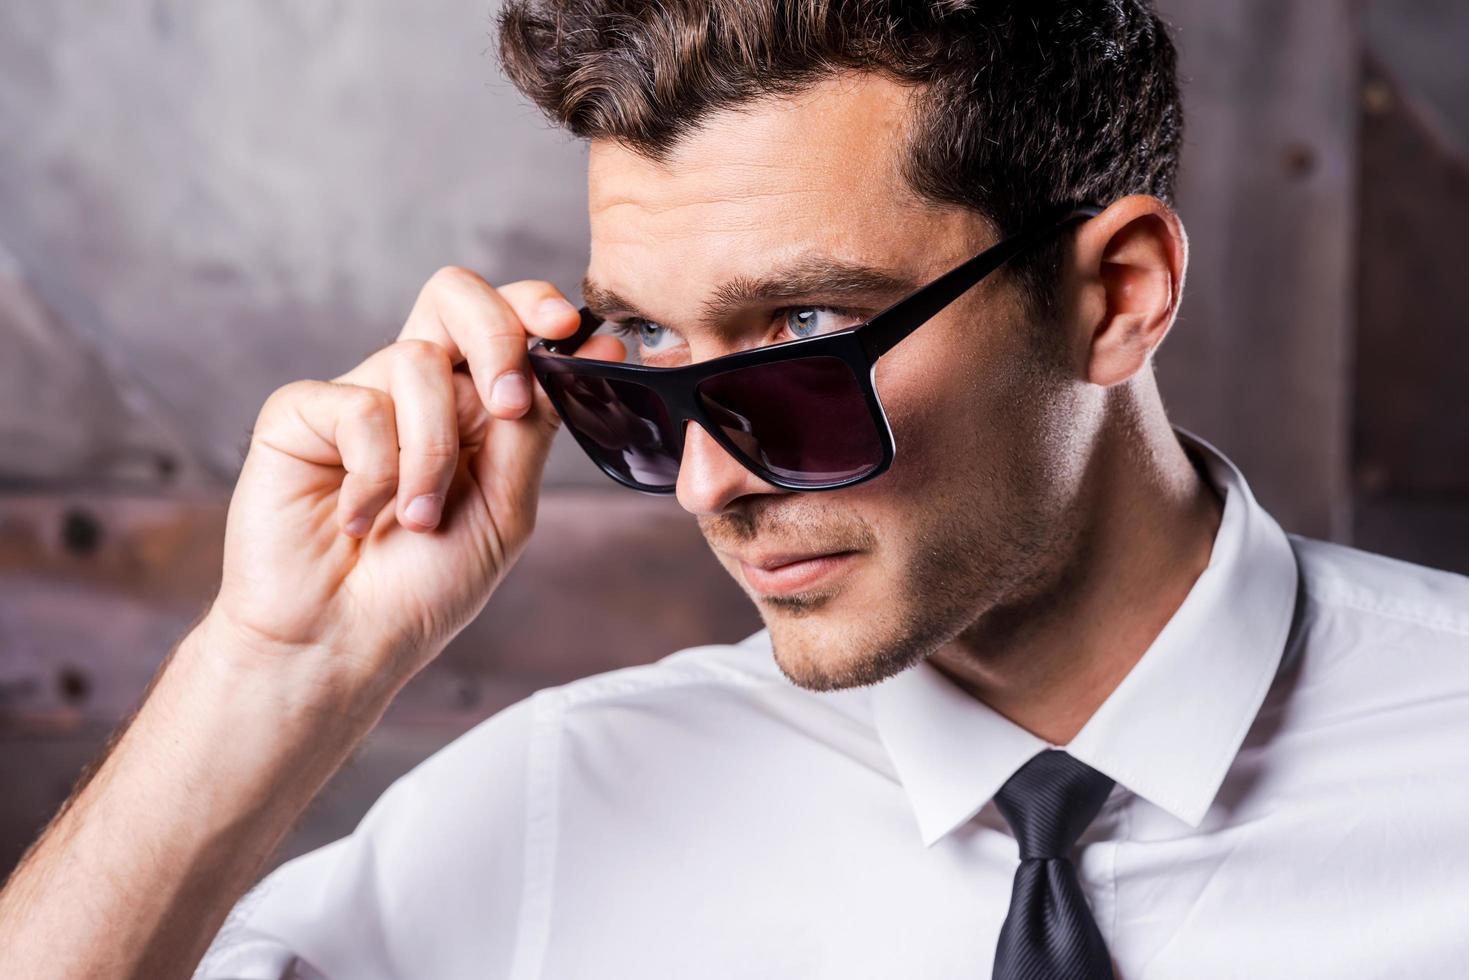 Cool and handsome. Confident young man in shirt and tie adjusting his sunglasses and looking away while standing against metal background photo